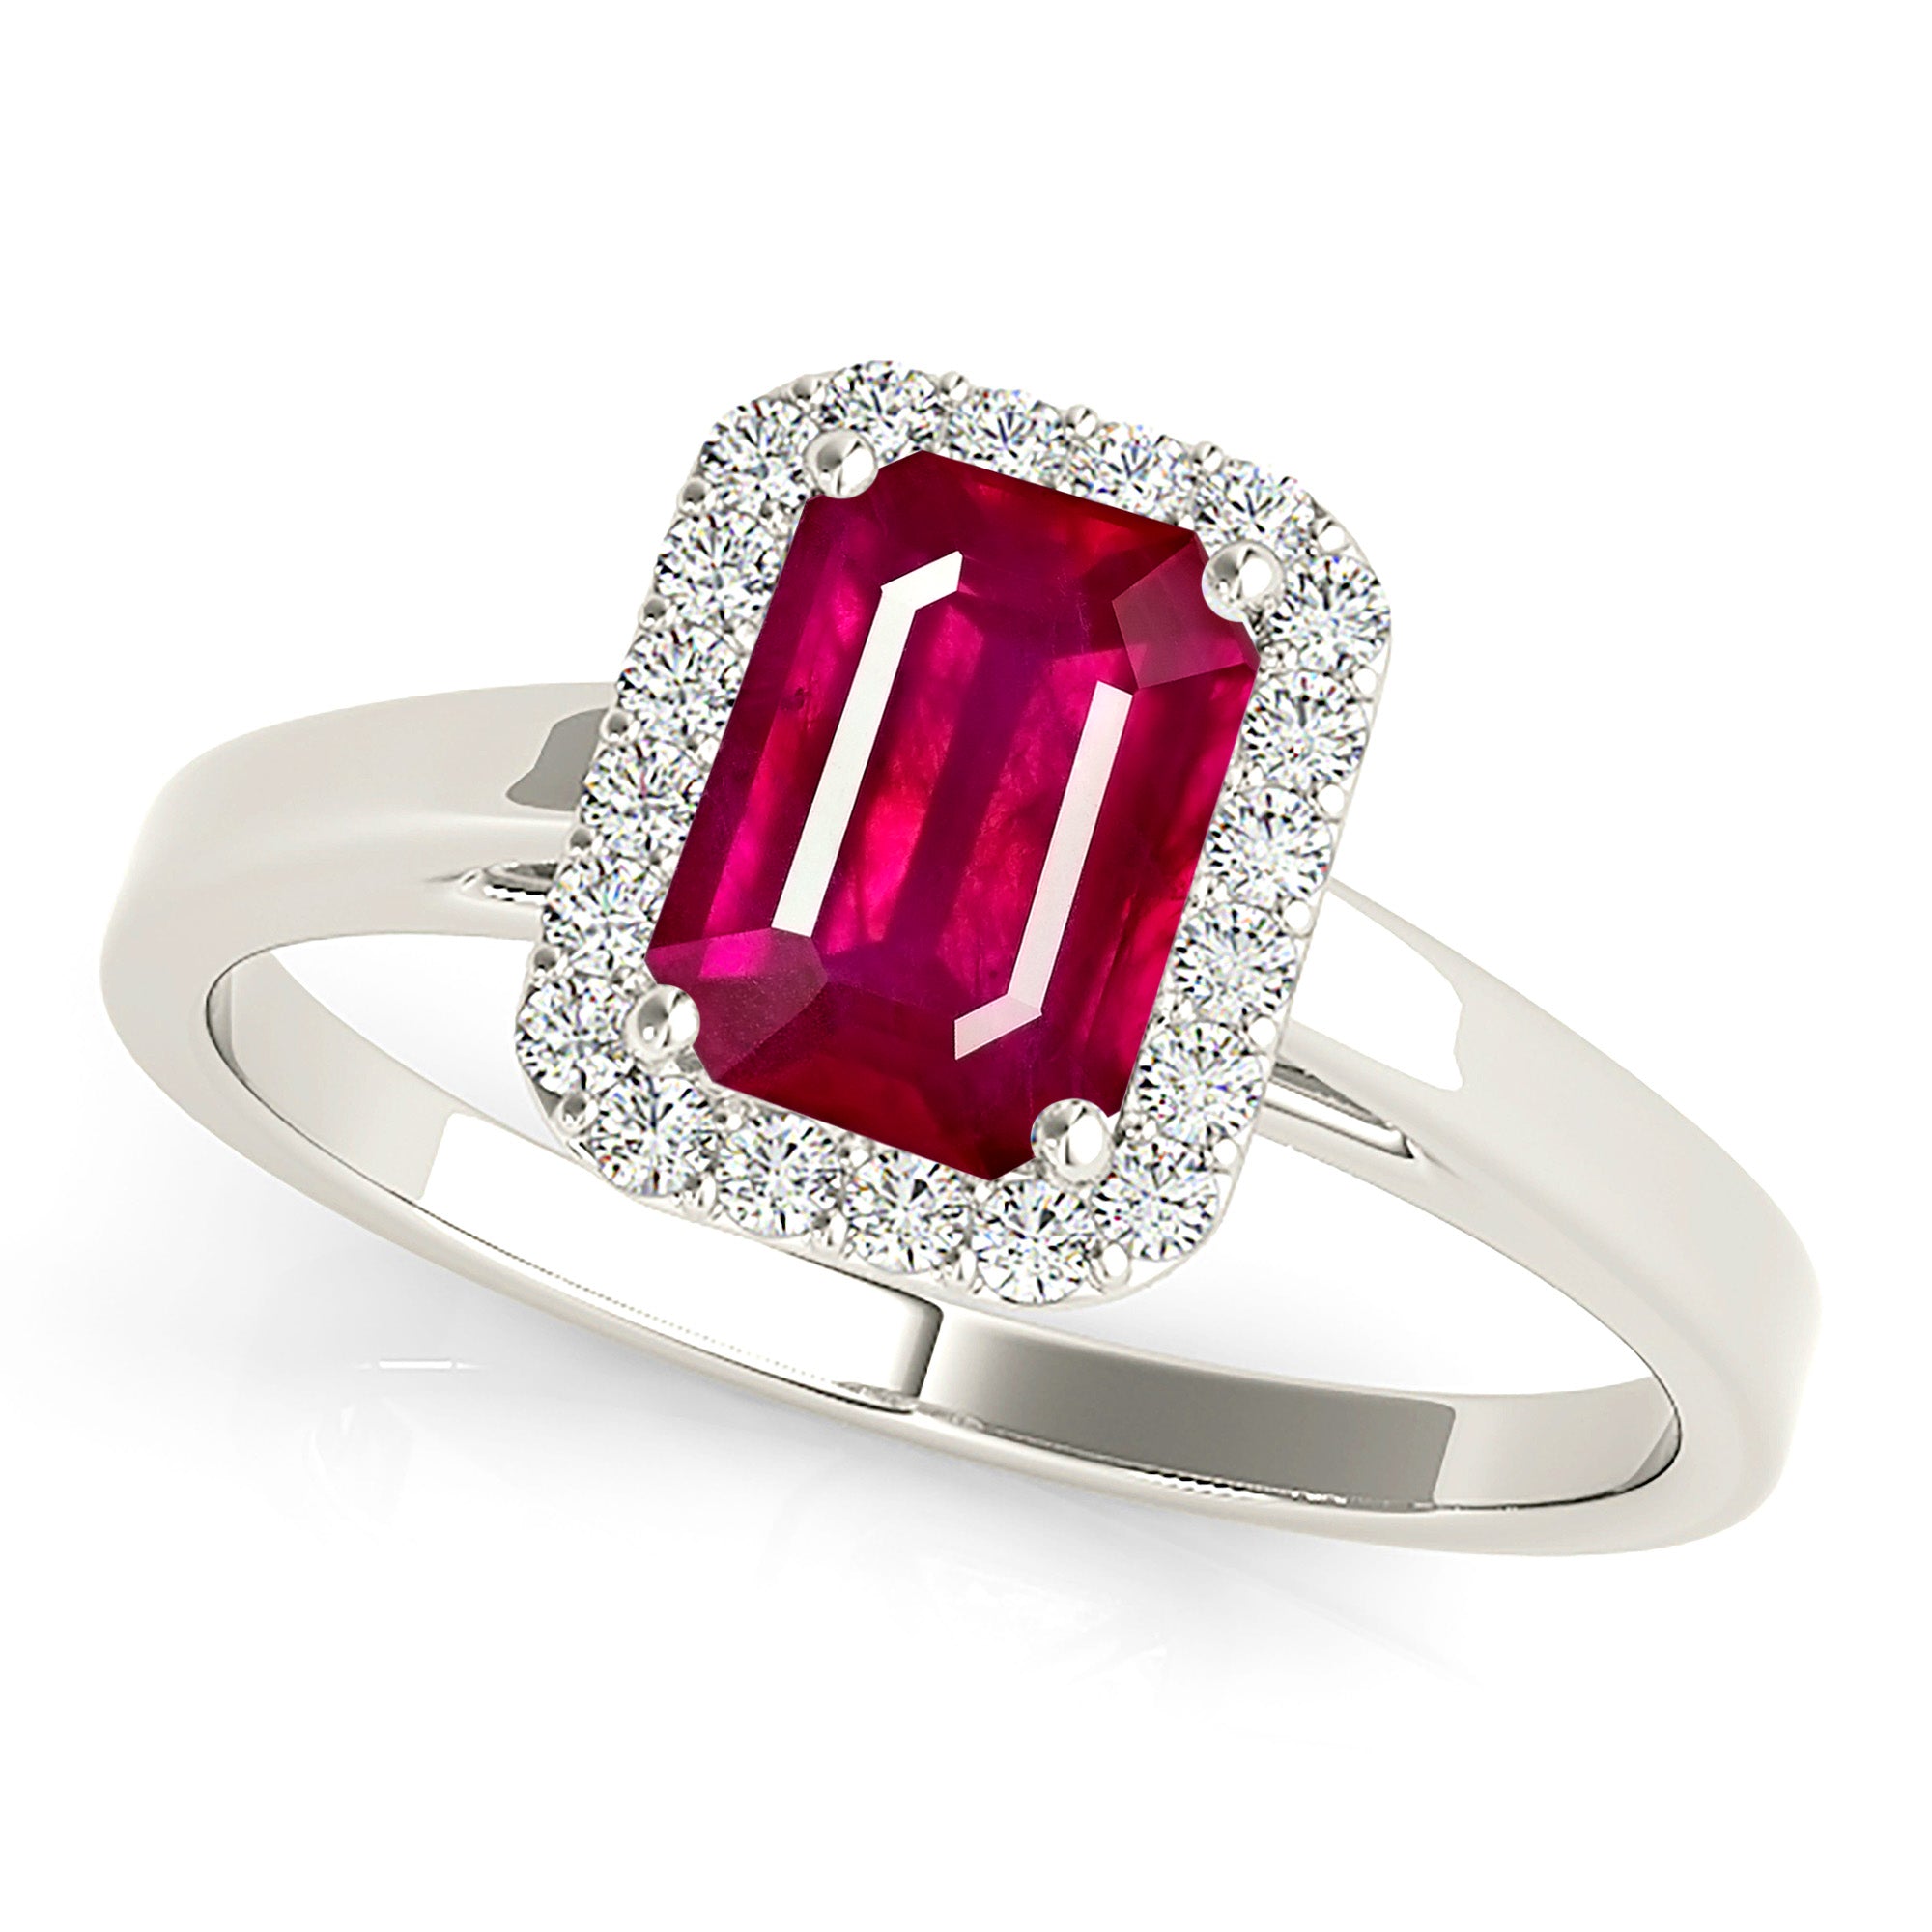 1.20 ct. Genuine Emerald Cut Ruby Ring with 0.20 ctw. Diamond Halo And Solid Gold Shank-in 14K/18K White, Yellow, Rose Gold and Platinum - Christmas Jewelry Gift -VIRABYANI